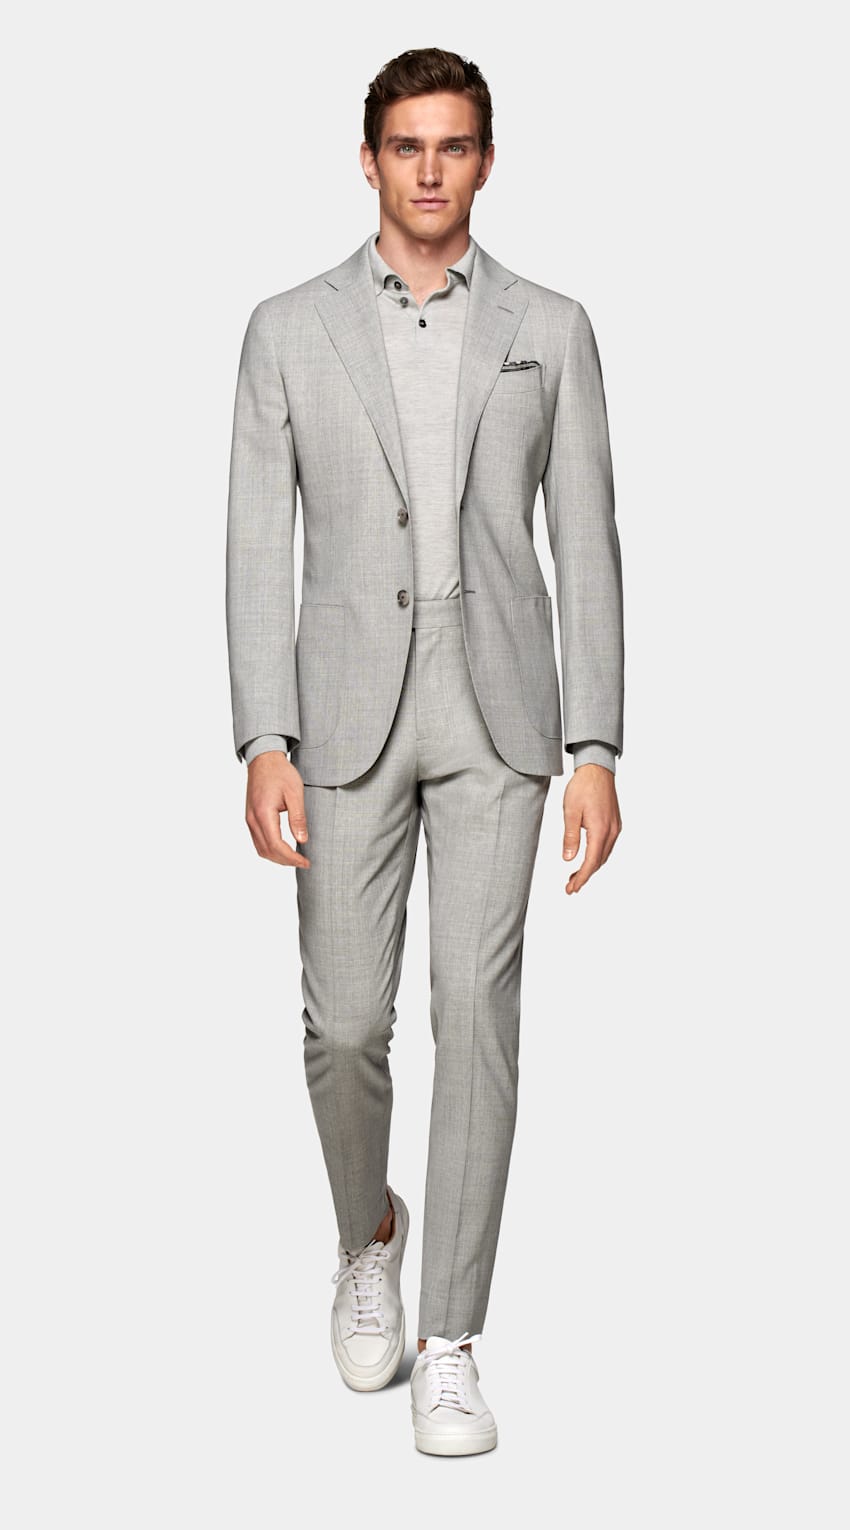 SUITSUPPLY Pure Wool Traveller by Vitale Barberis Canonico, Italy Light Grey Custom Made Suit